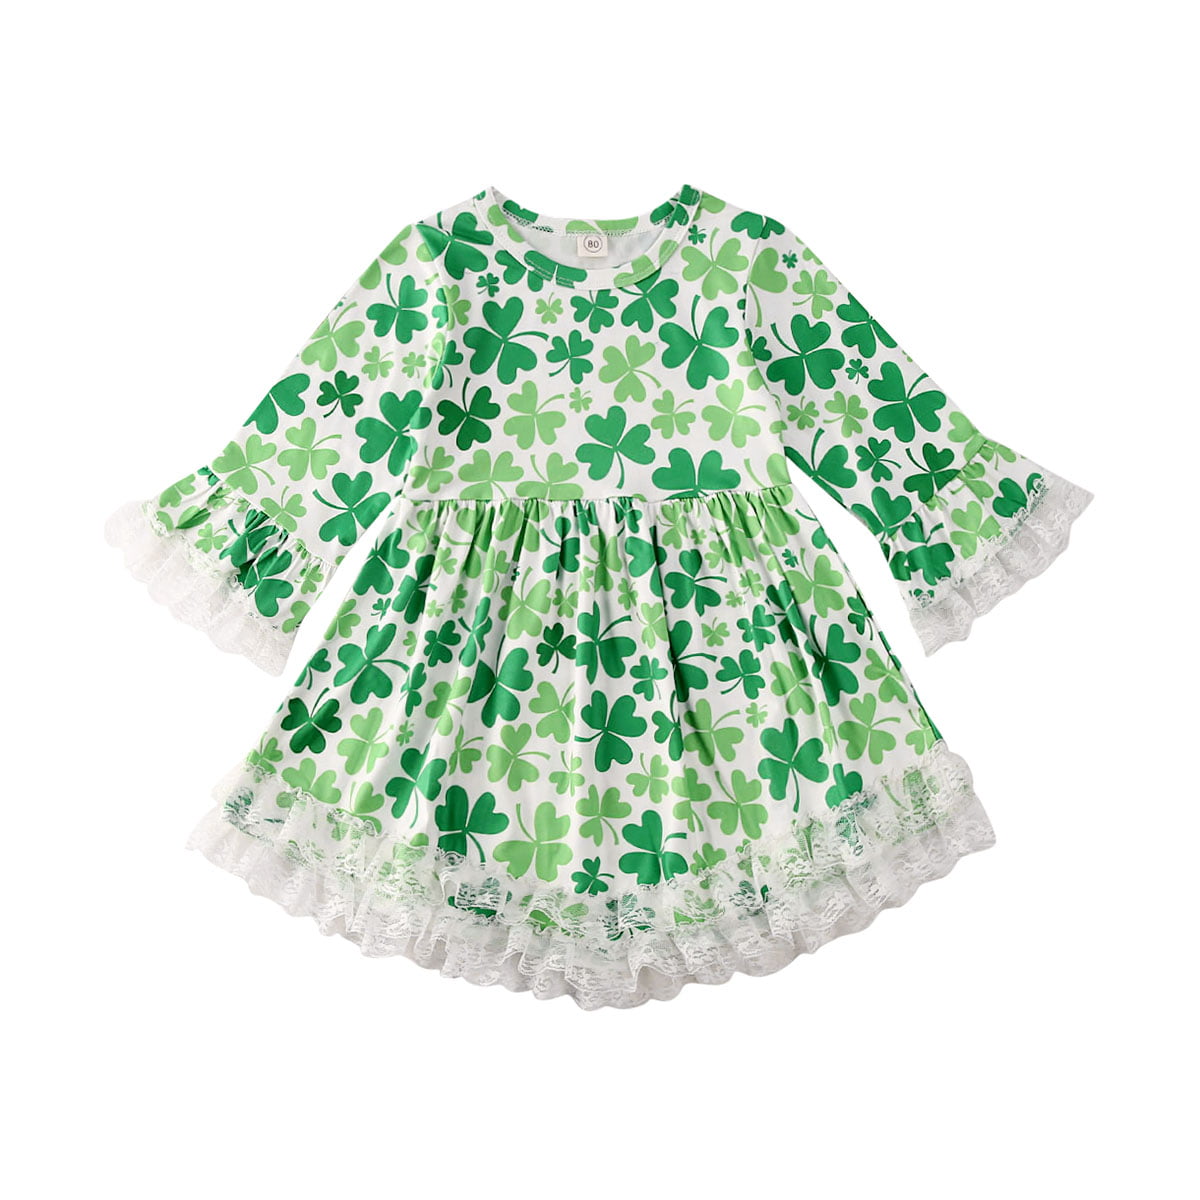 Toddler Baby Girls St.Patrick's Day Outfit Long Sleeve Polka Dot Tutu Skirt Princess Party Dress Spring Fall Clothes Set